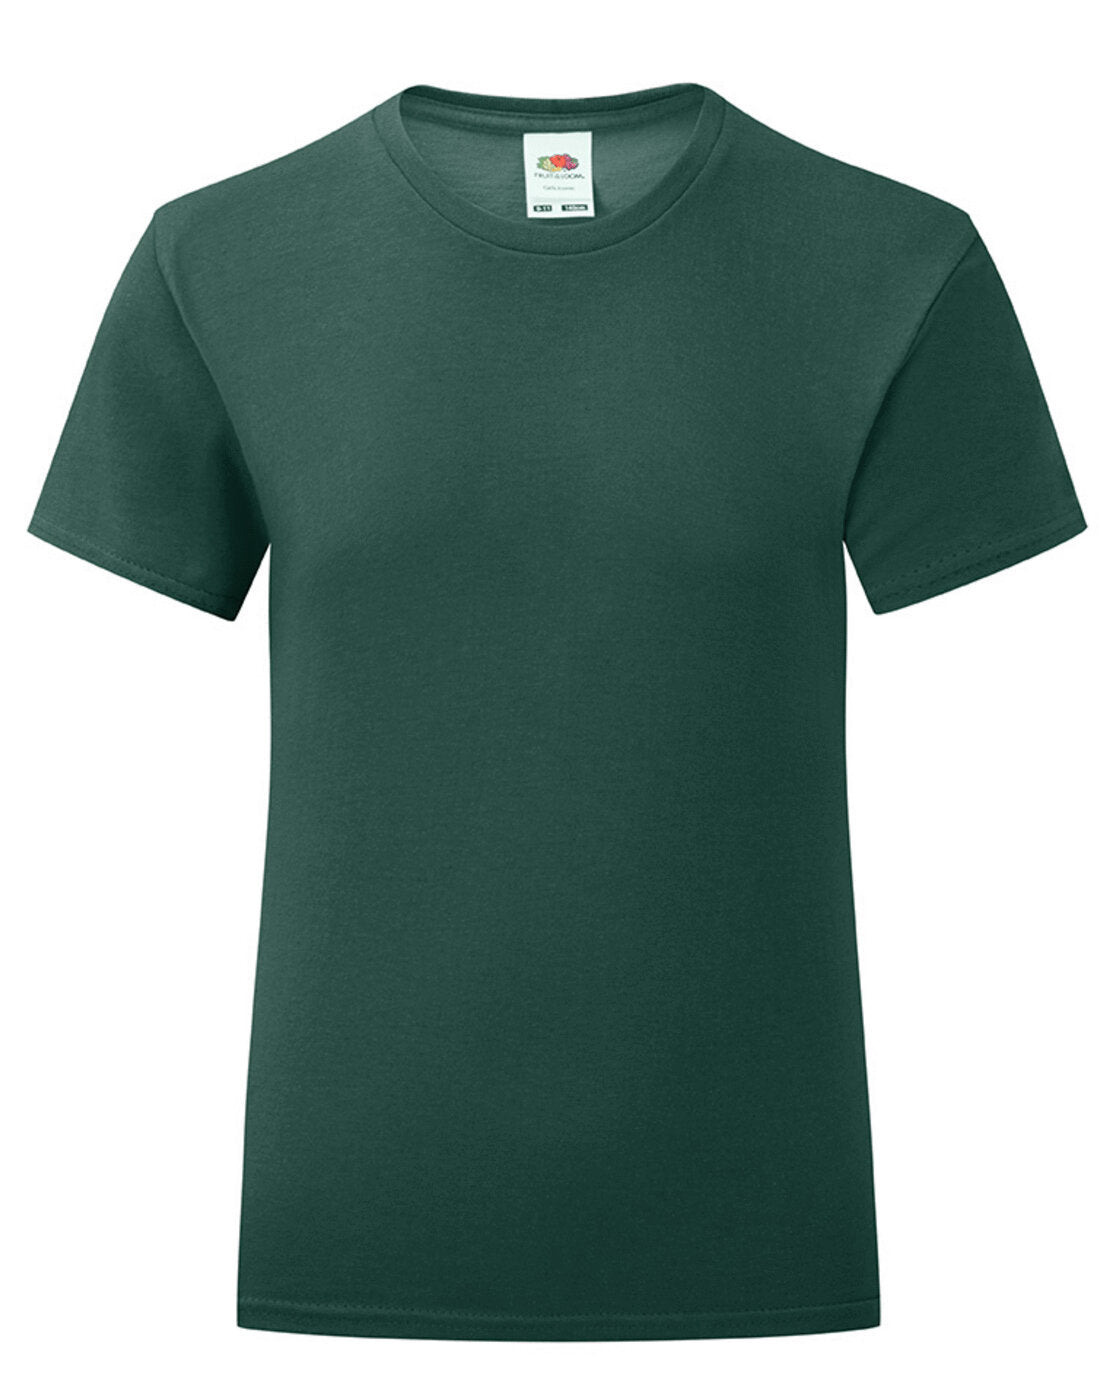 Fruit of the Loom Girls Iconic T - Forest Green